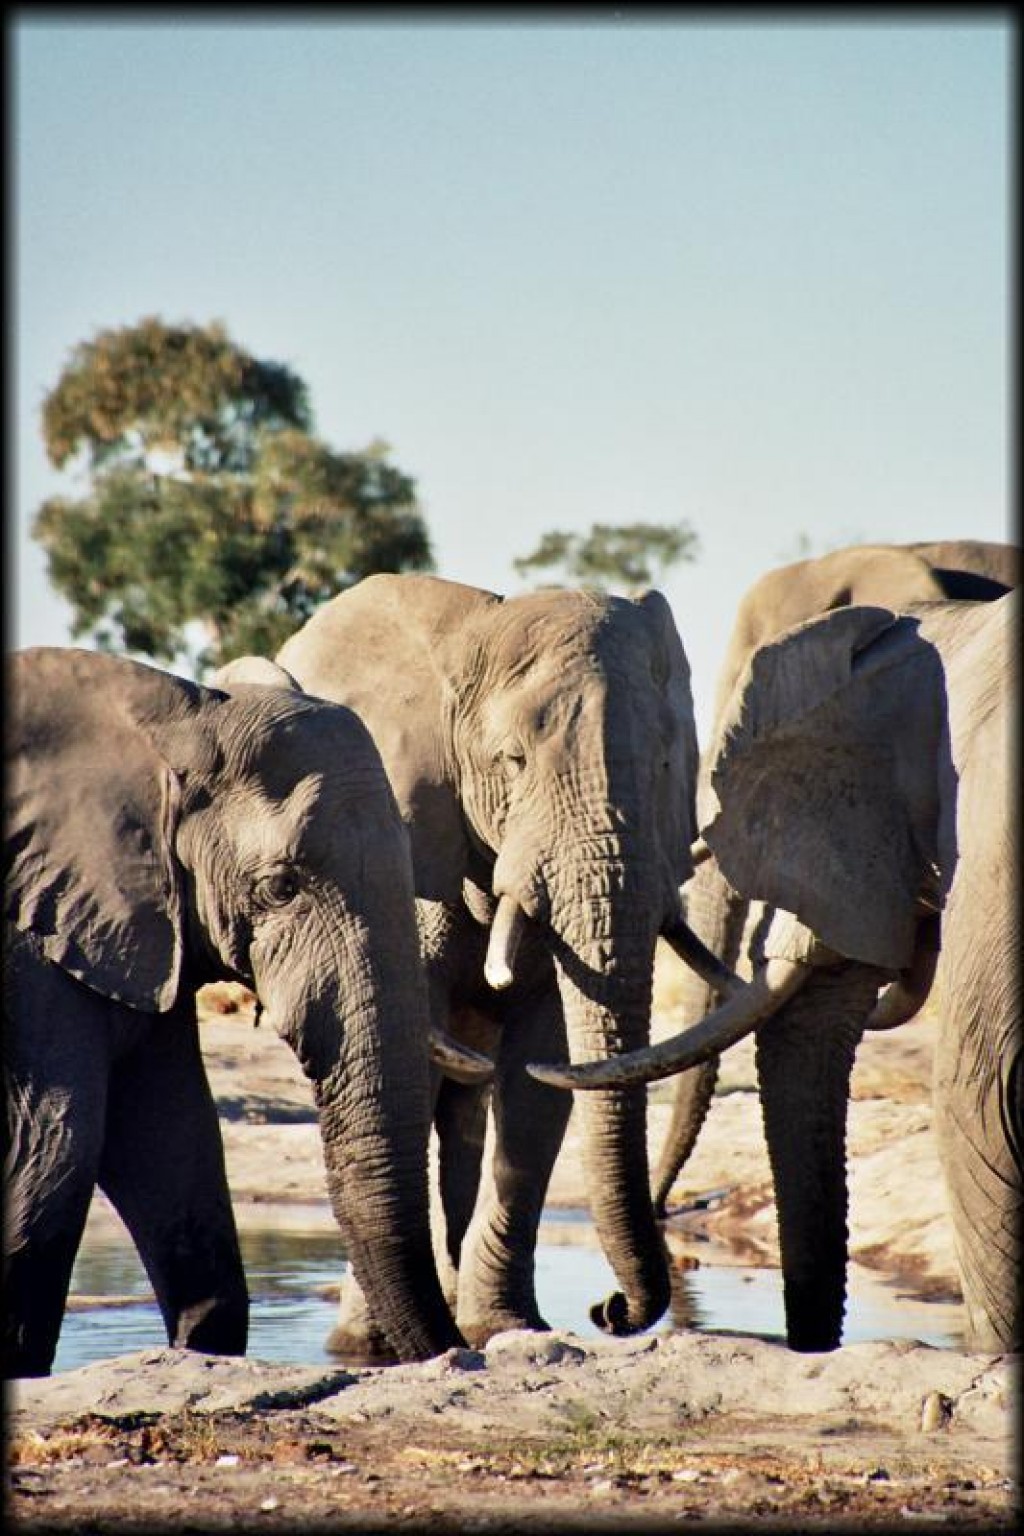 Our first stop in Chobe National Park was the Savute Reserve. Elephants and elephants and elephants...
